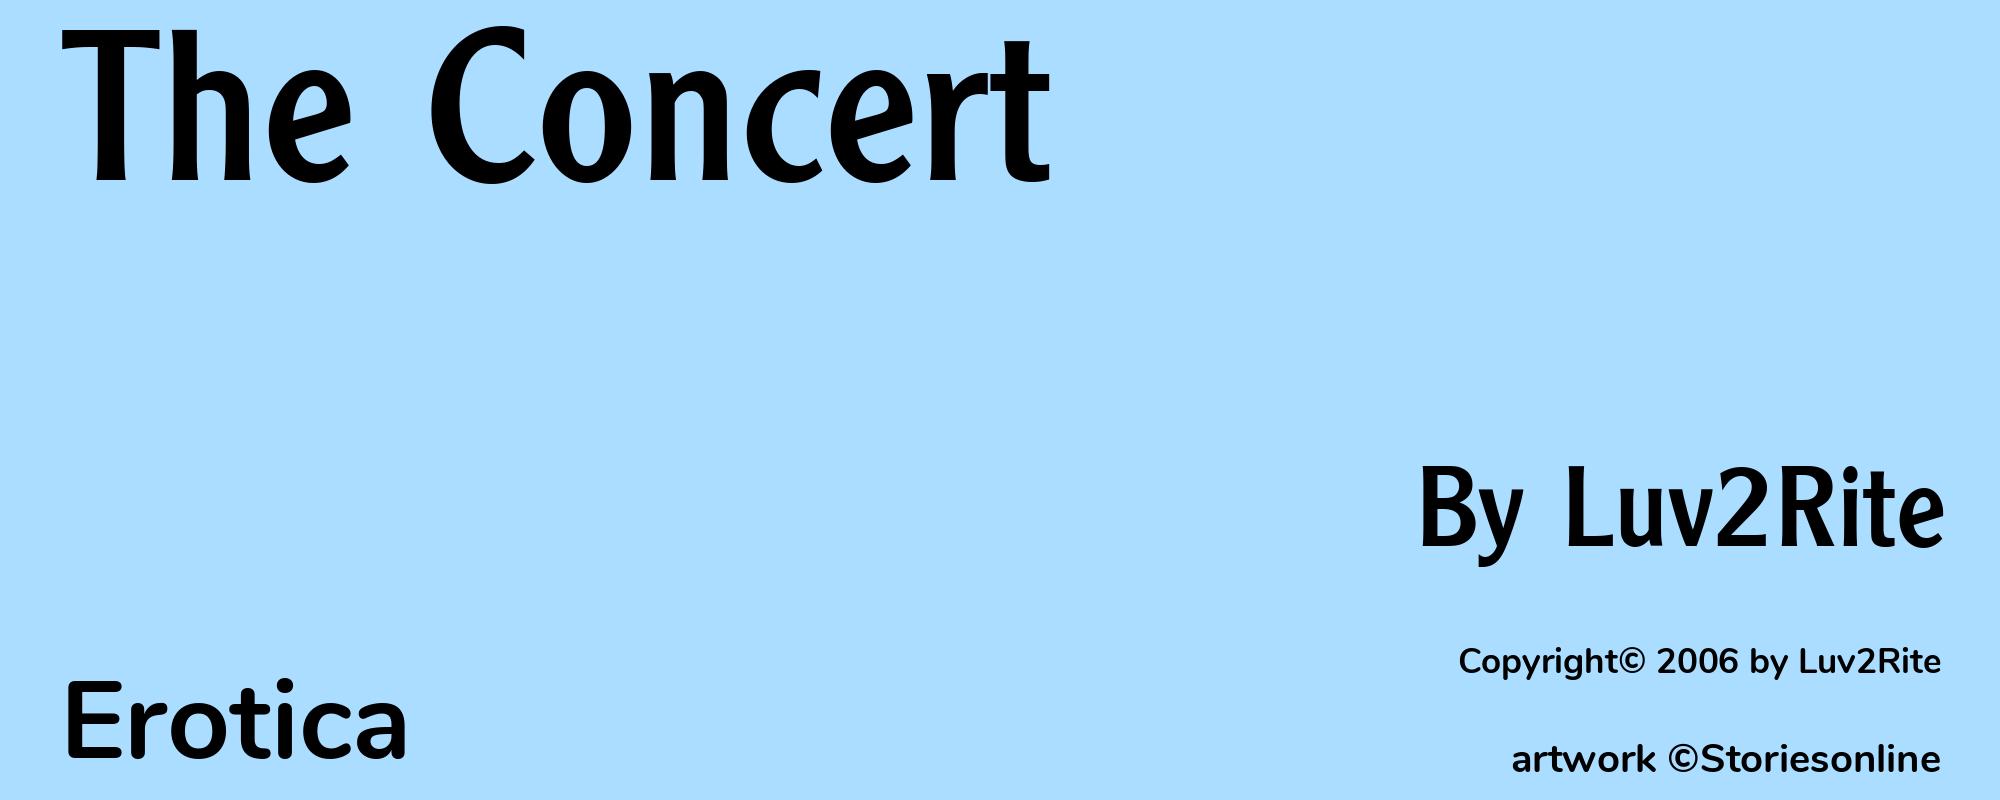 The Concert - Cover